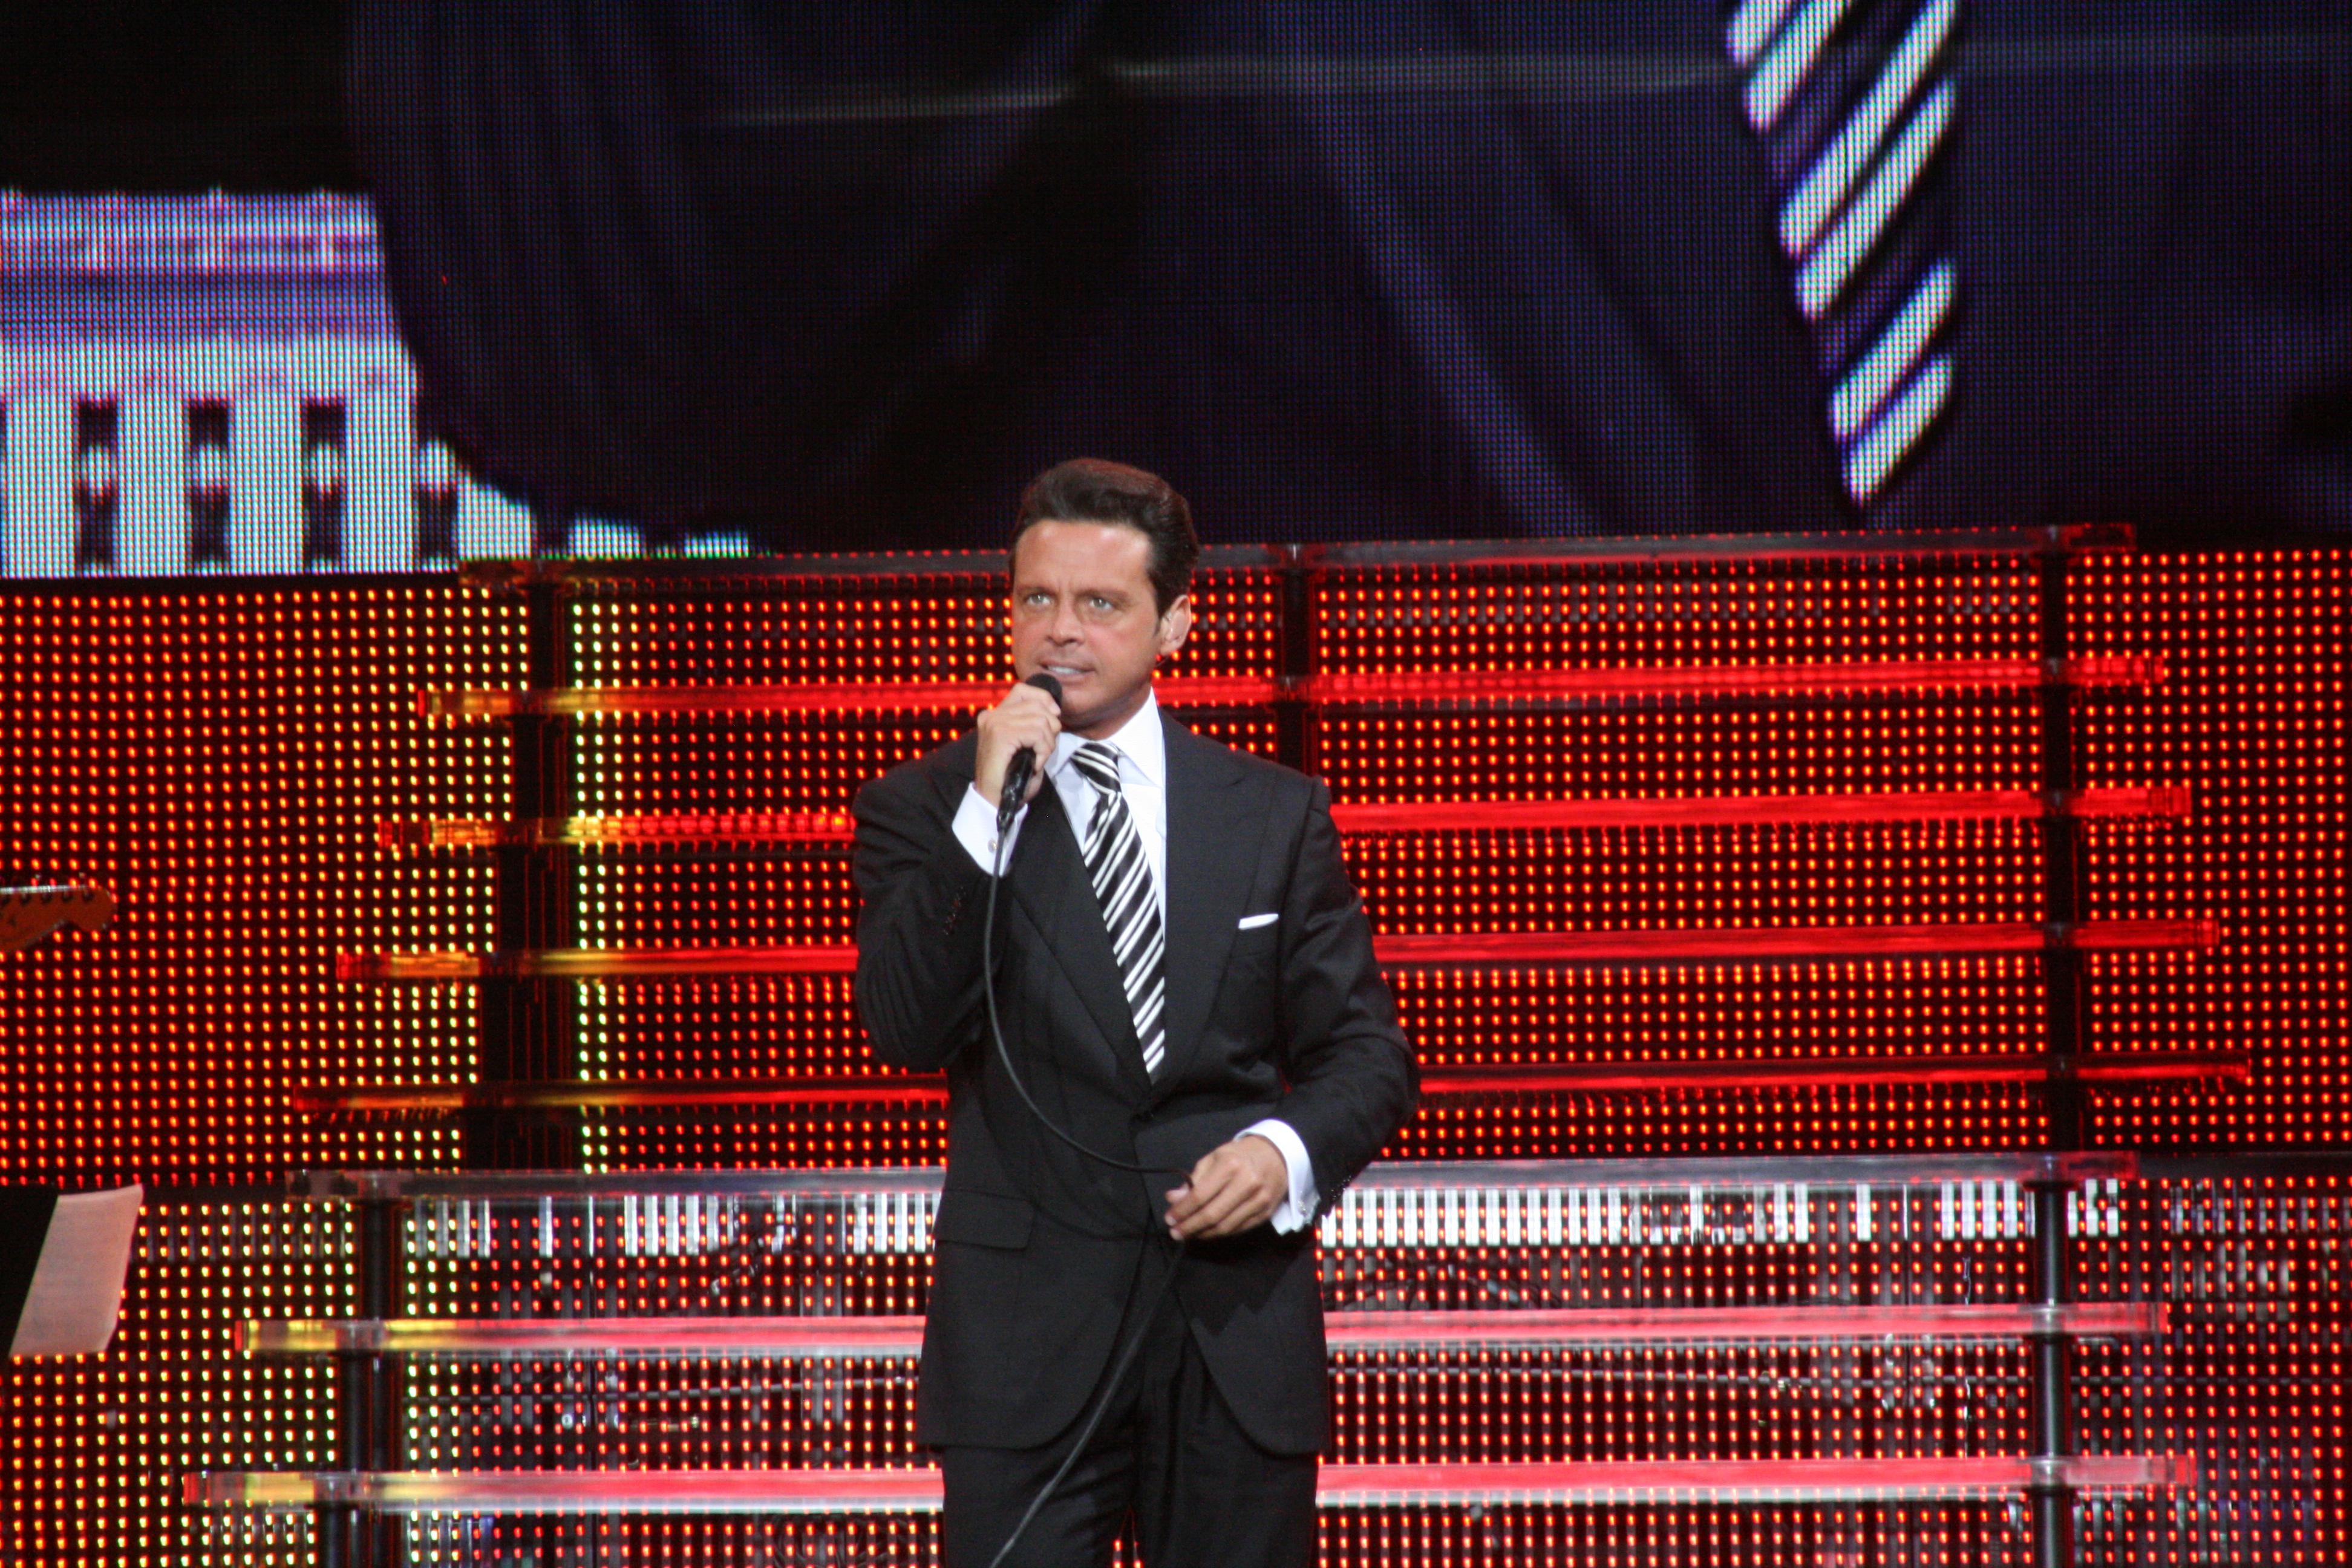 File:Luis Miguel (cropped).jpg - Wikimedia Commons